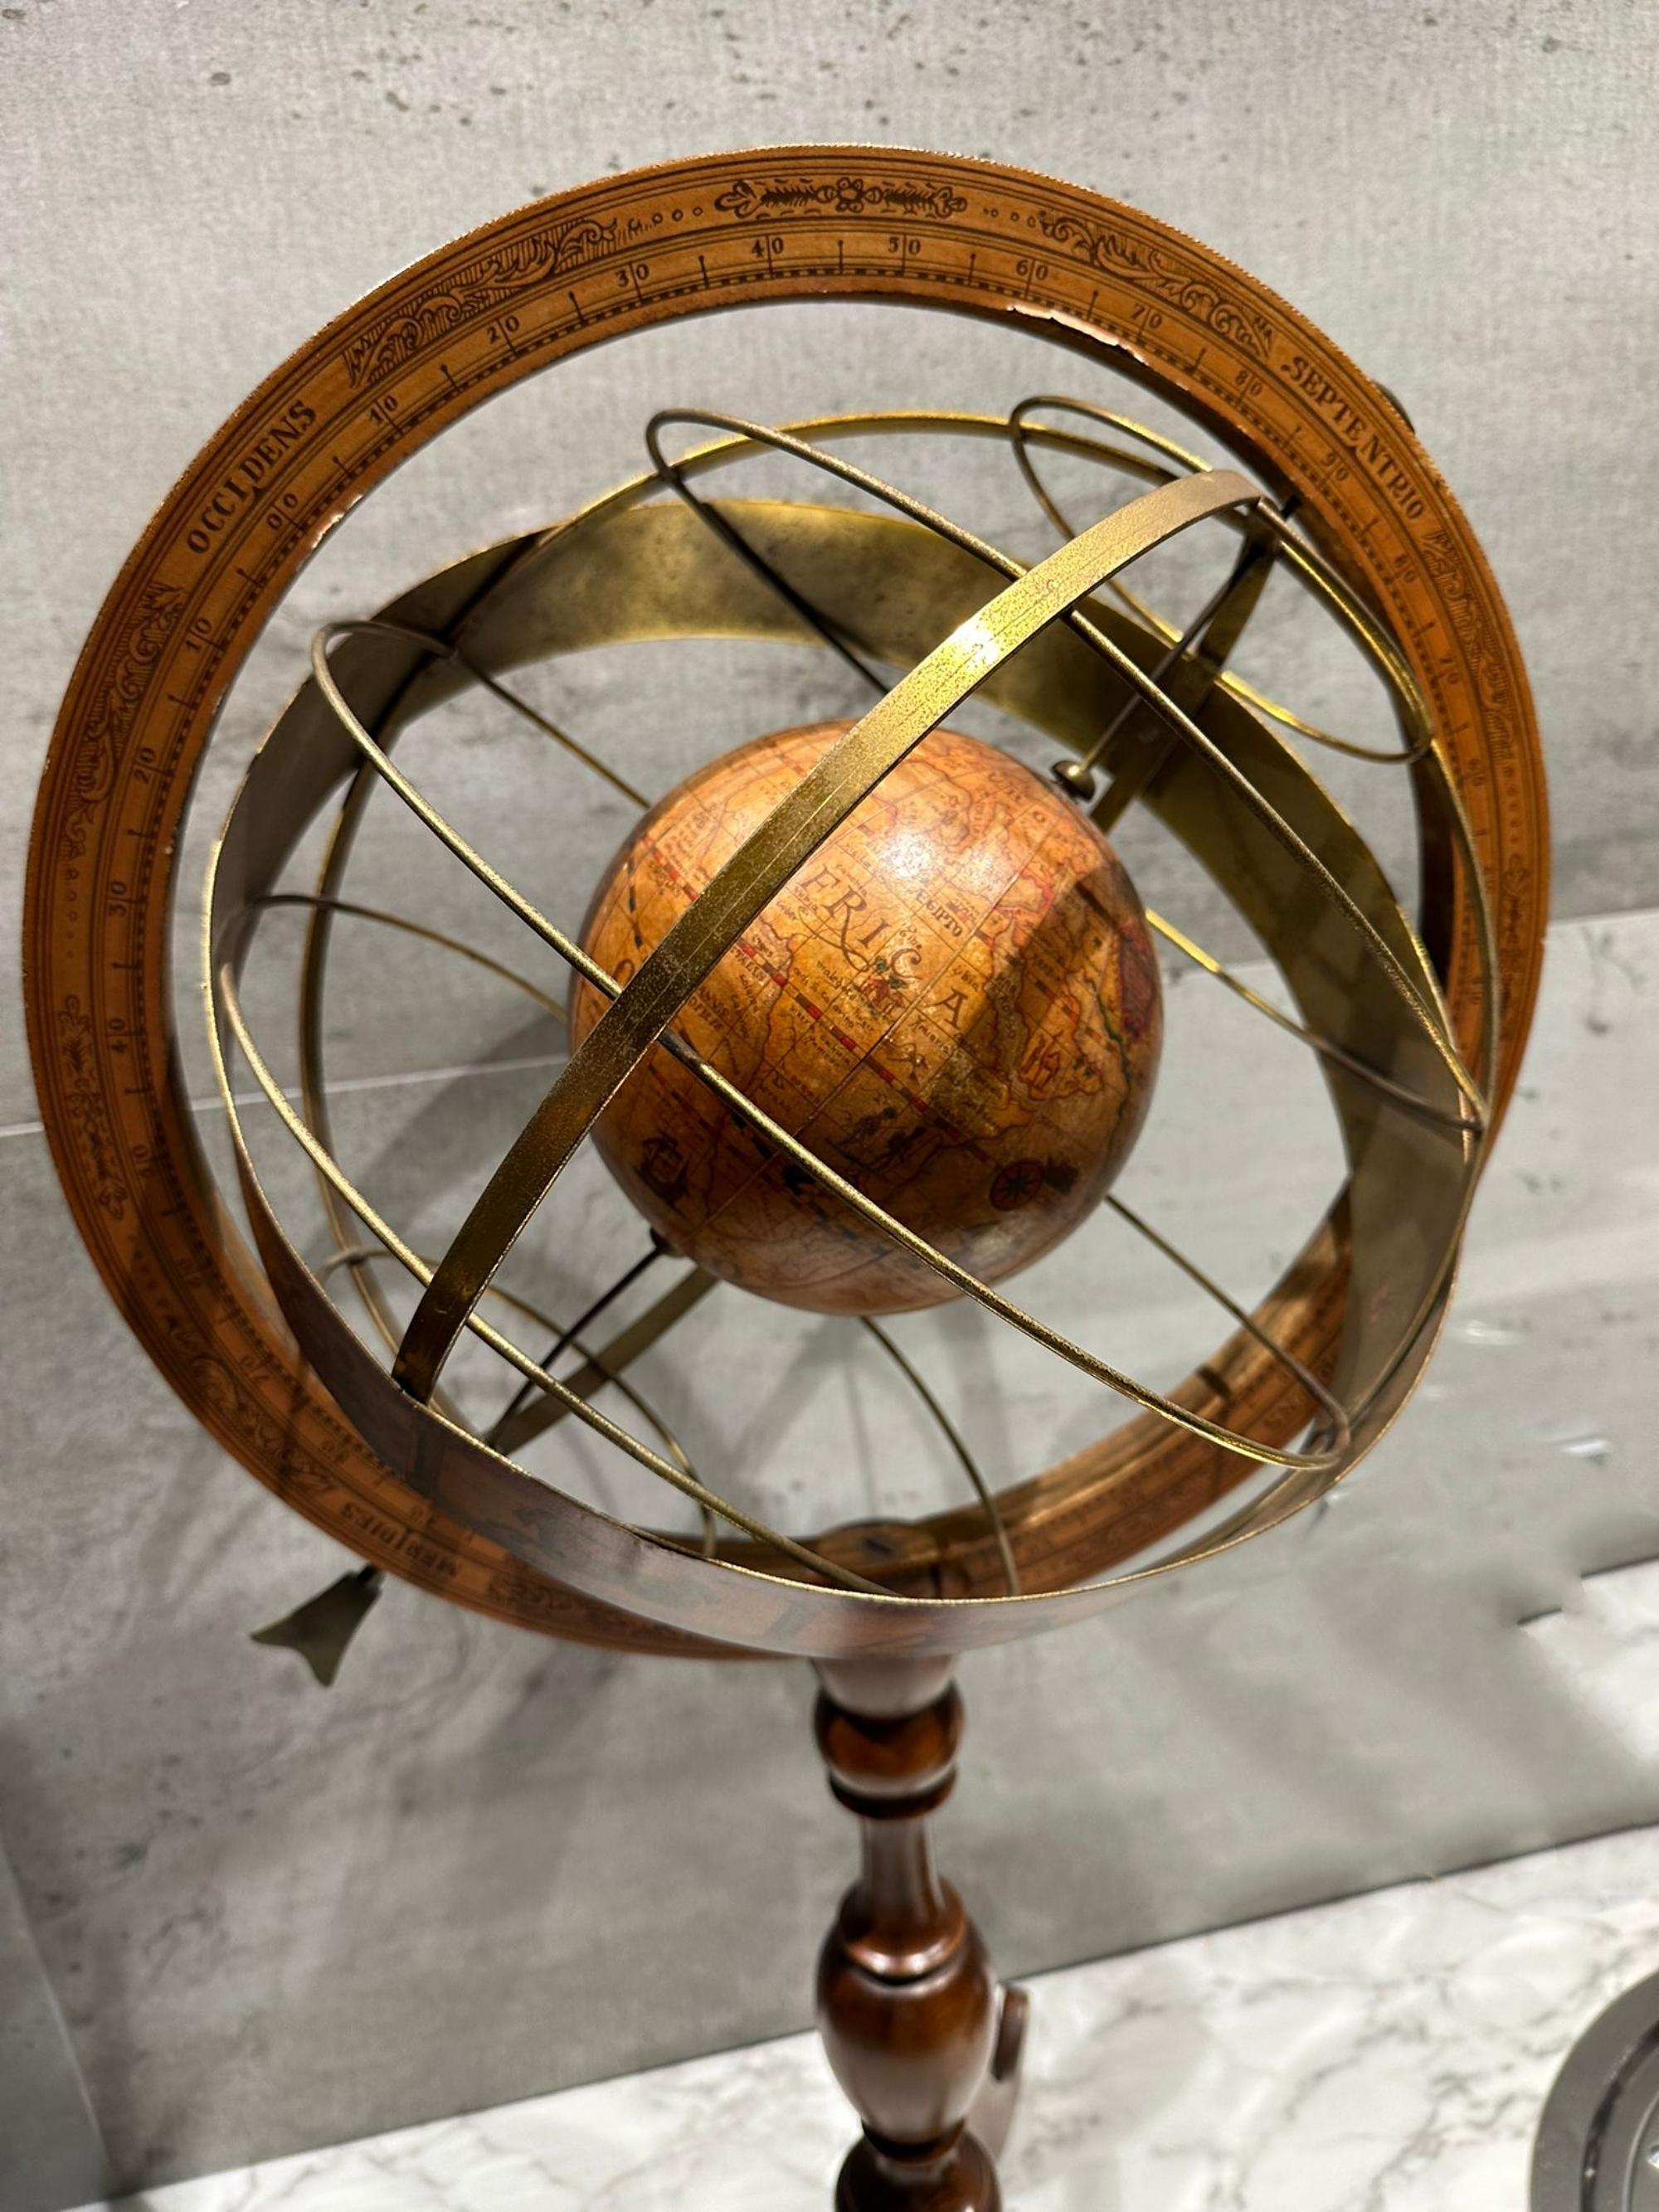 Hand-Crafted Impressive and Ancient Italian Armillary Sphere from Early 20th Century